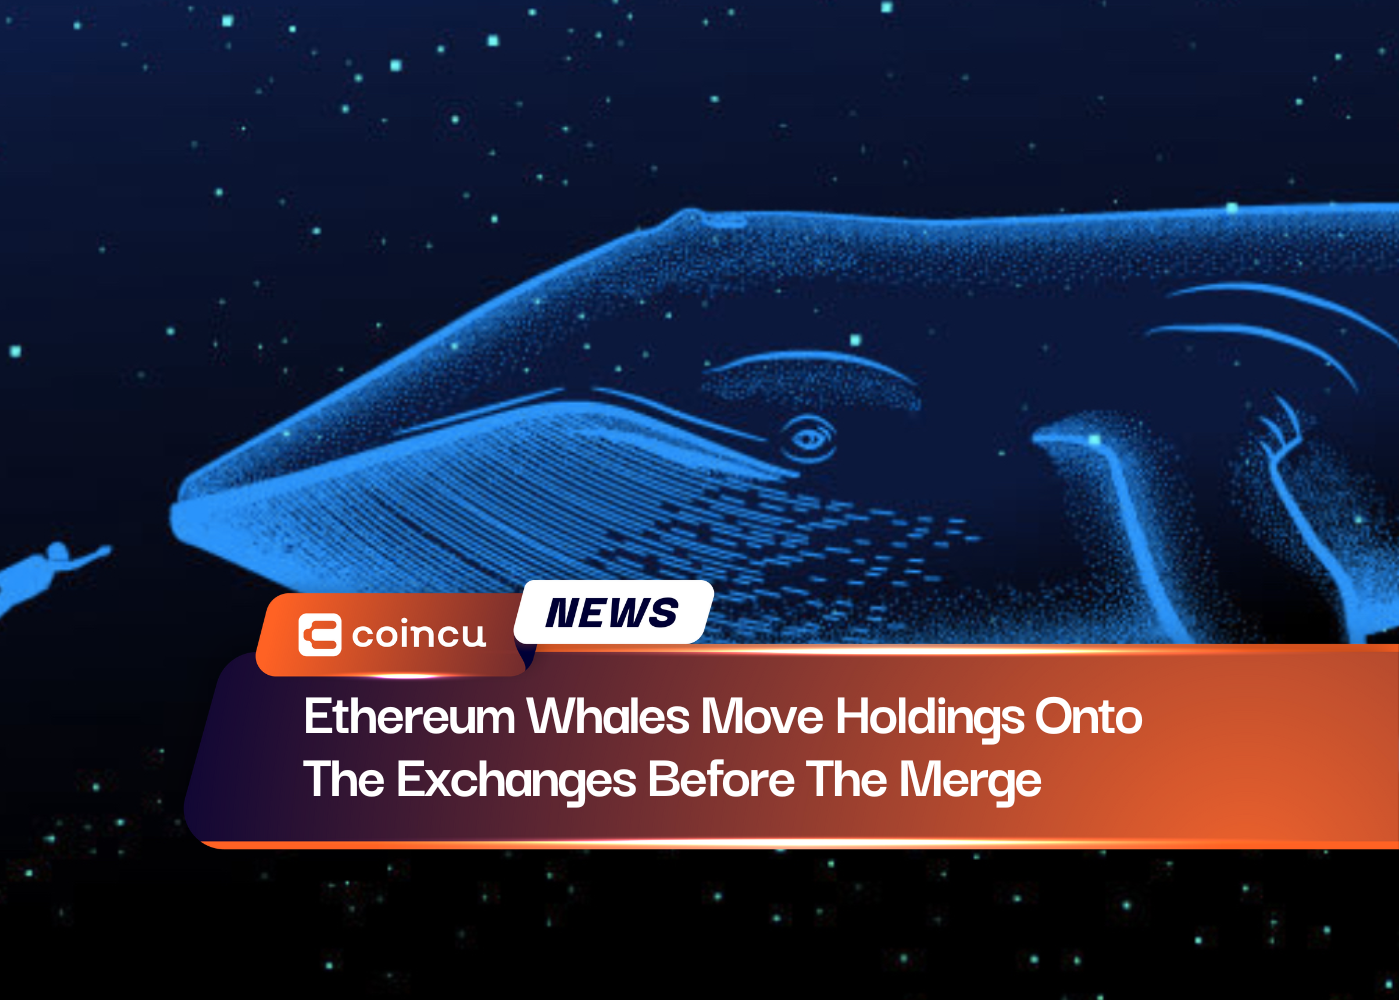 Ethereum Whales Move Holdings Onto The Exchanges Before The Merge